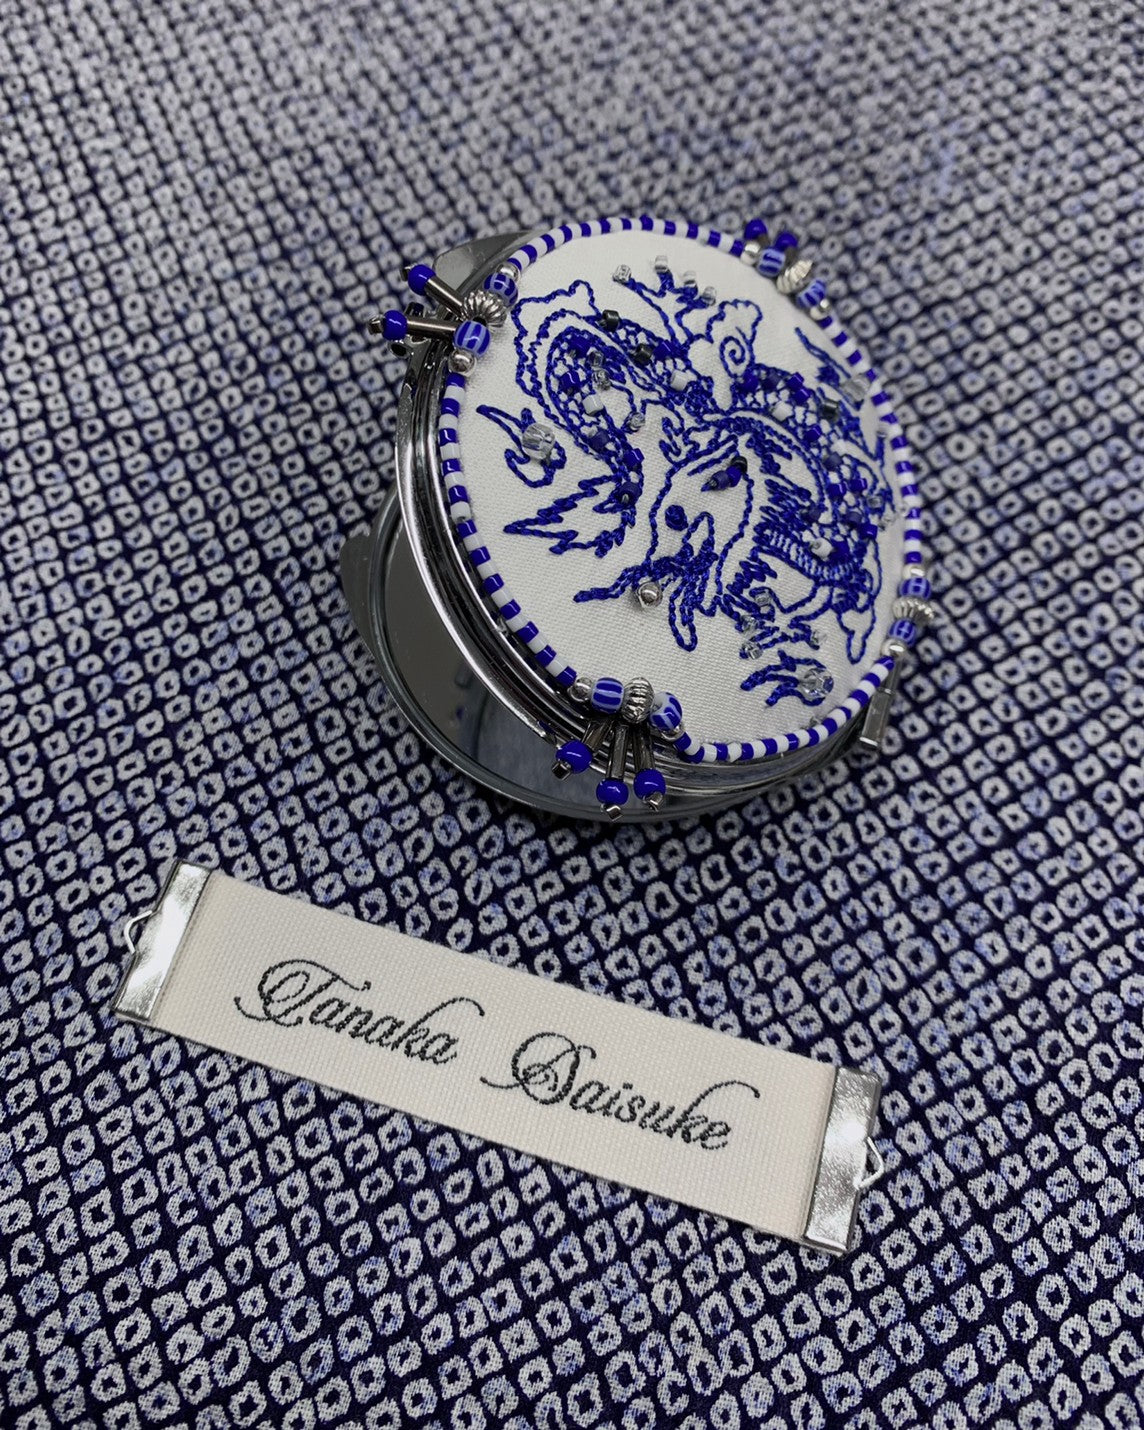 Blue Dragon compact mirror (silver)【Delivery in February 2023】